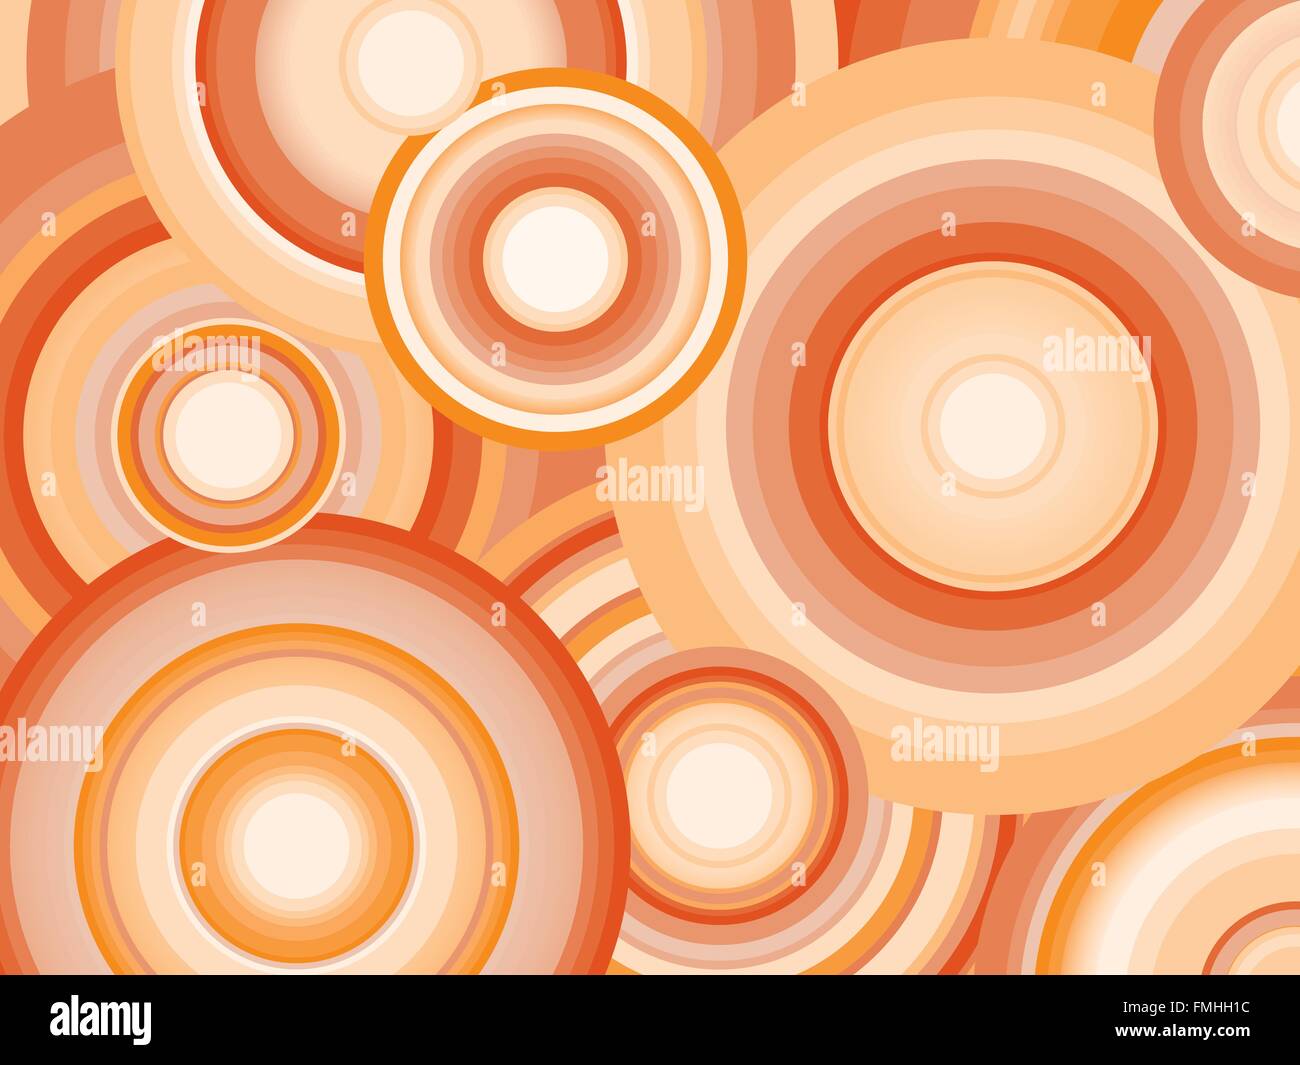 Abstract background with orange shaded concentric circles Stock Vector